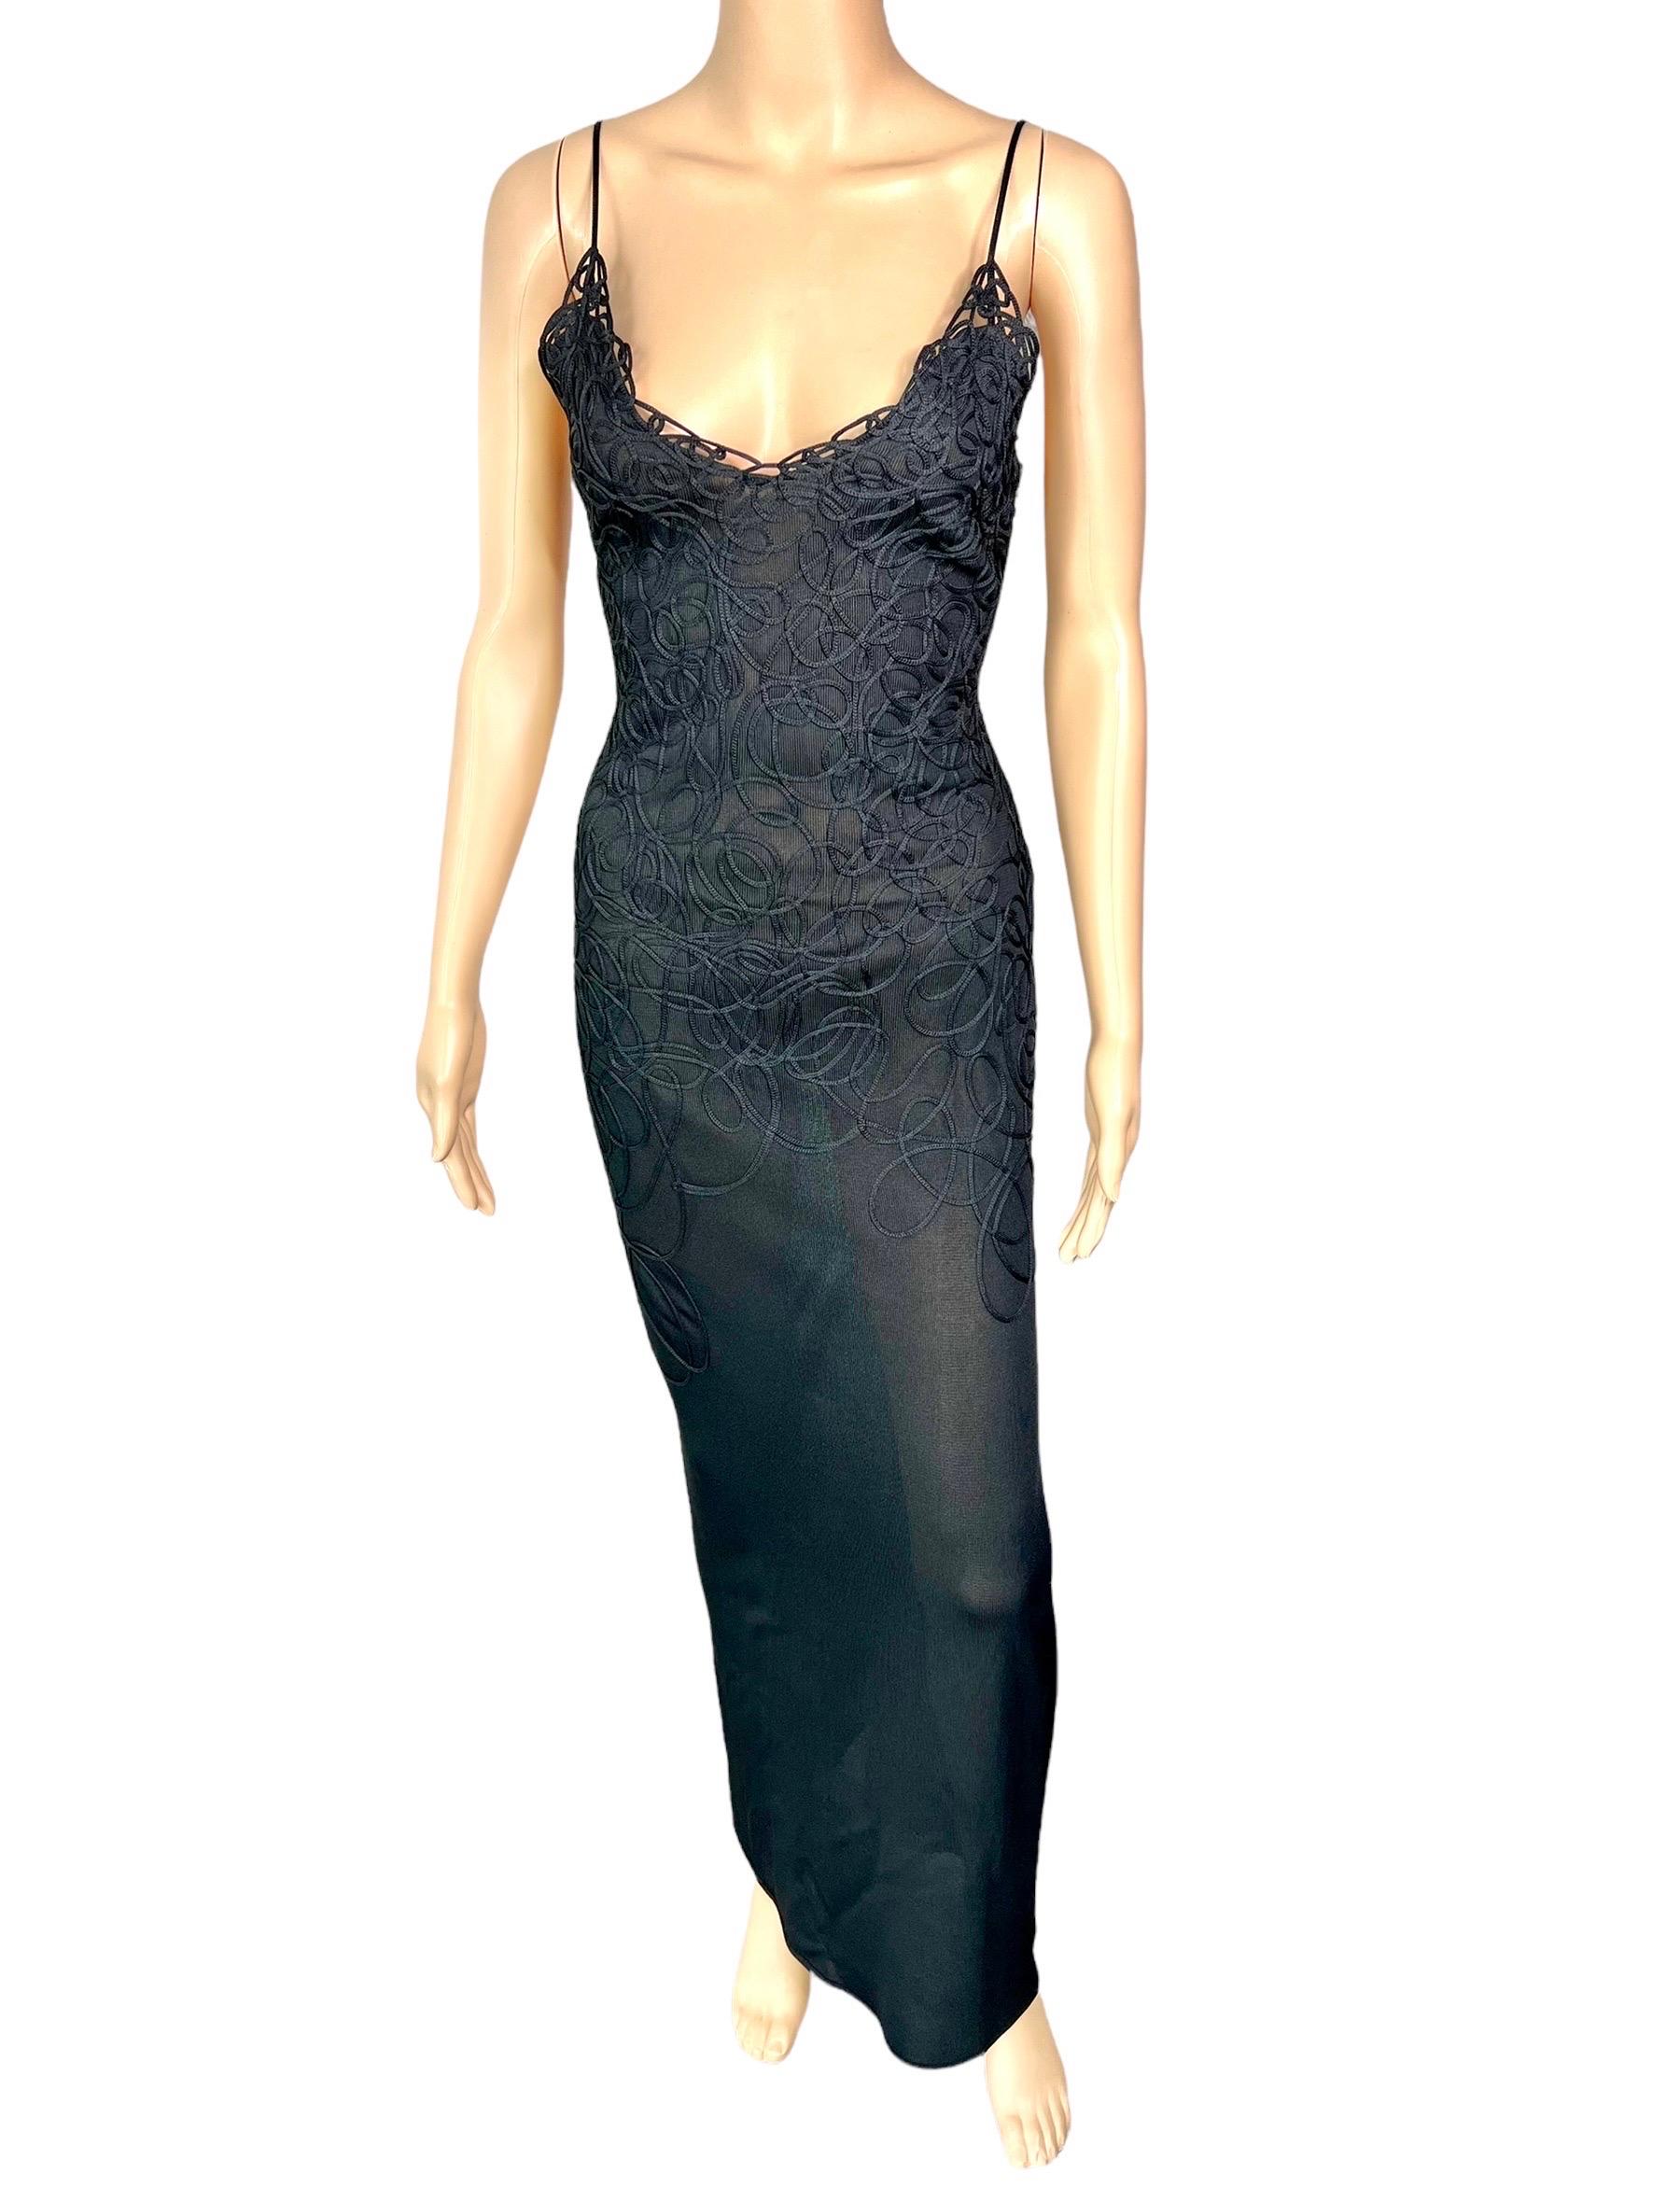 Thierry Mugler Vintage Embroidered Semi-Sheer Knit Bodycon Black Maxi Dress  2